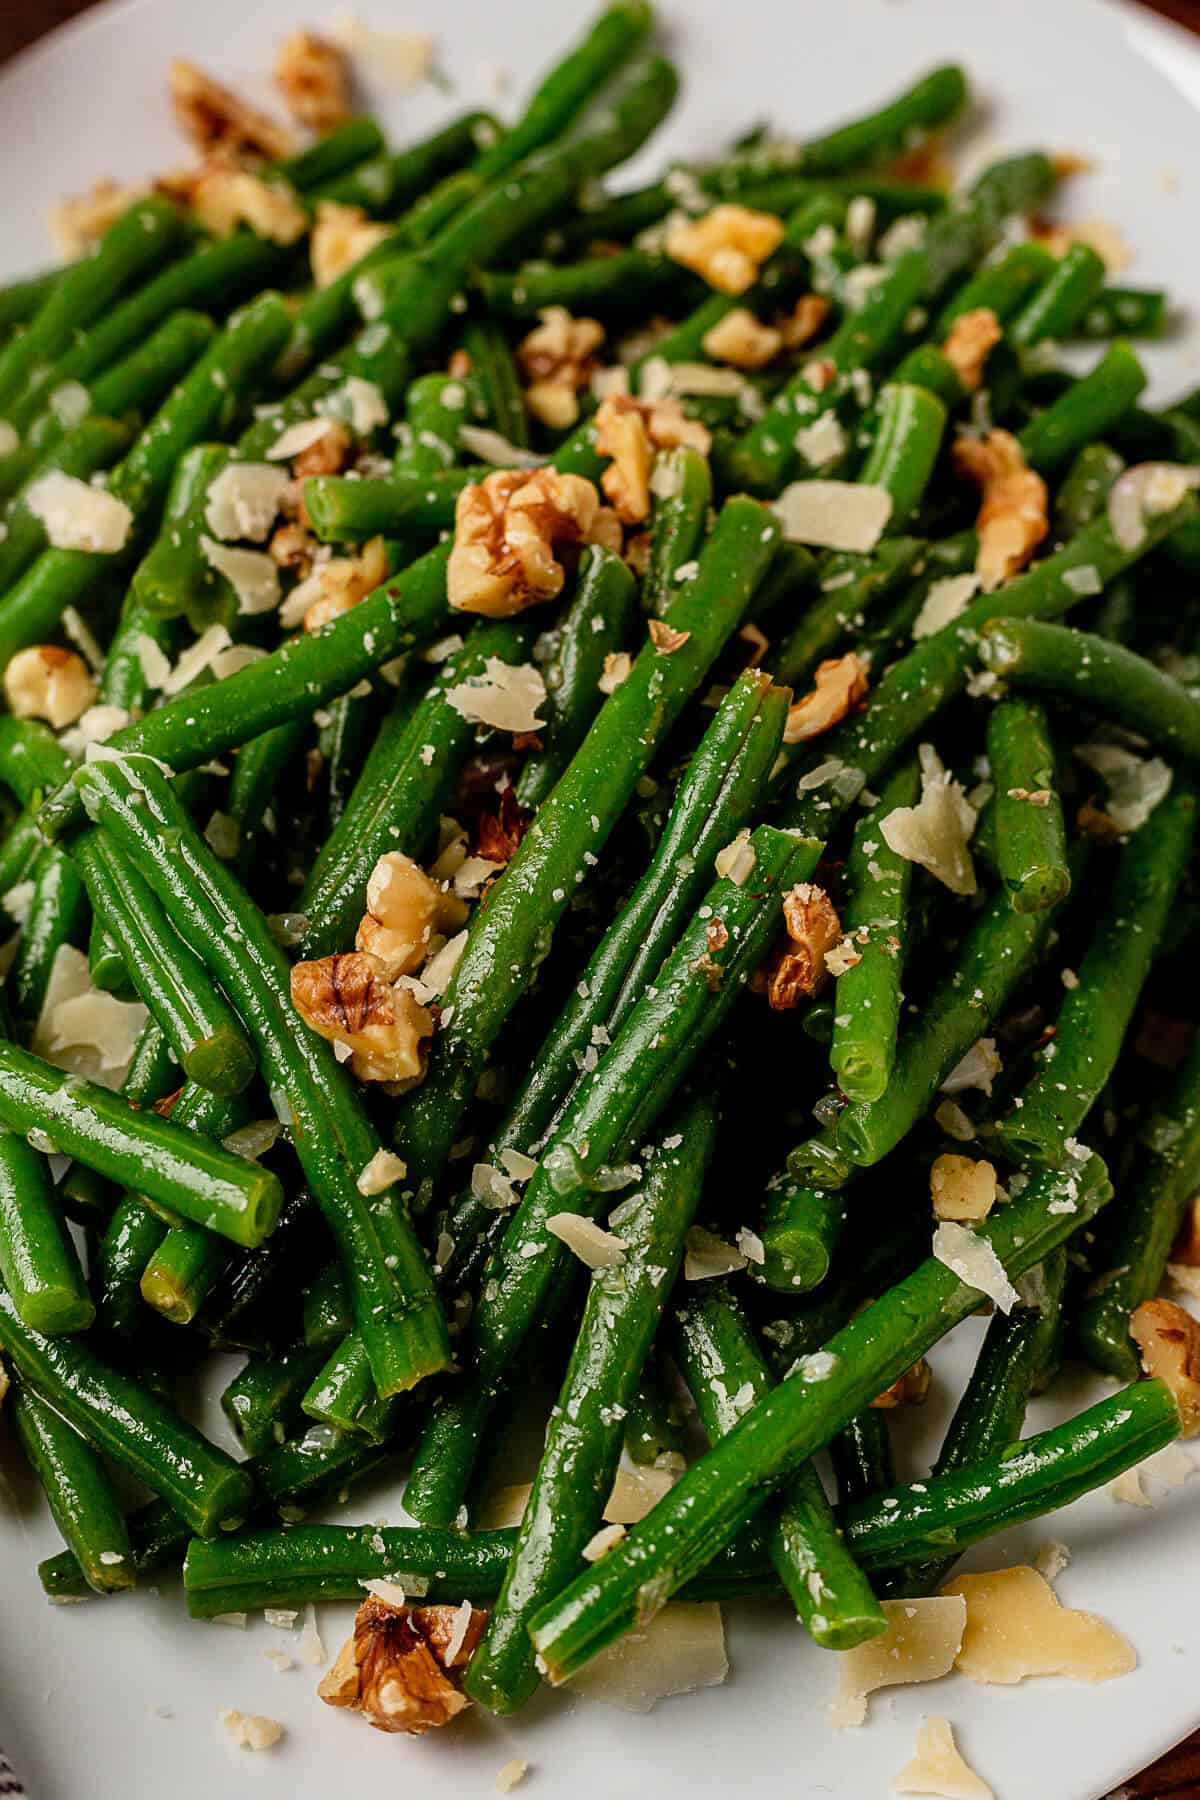 French Haricot Verts Recipe - I'd Rather Be A Chef